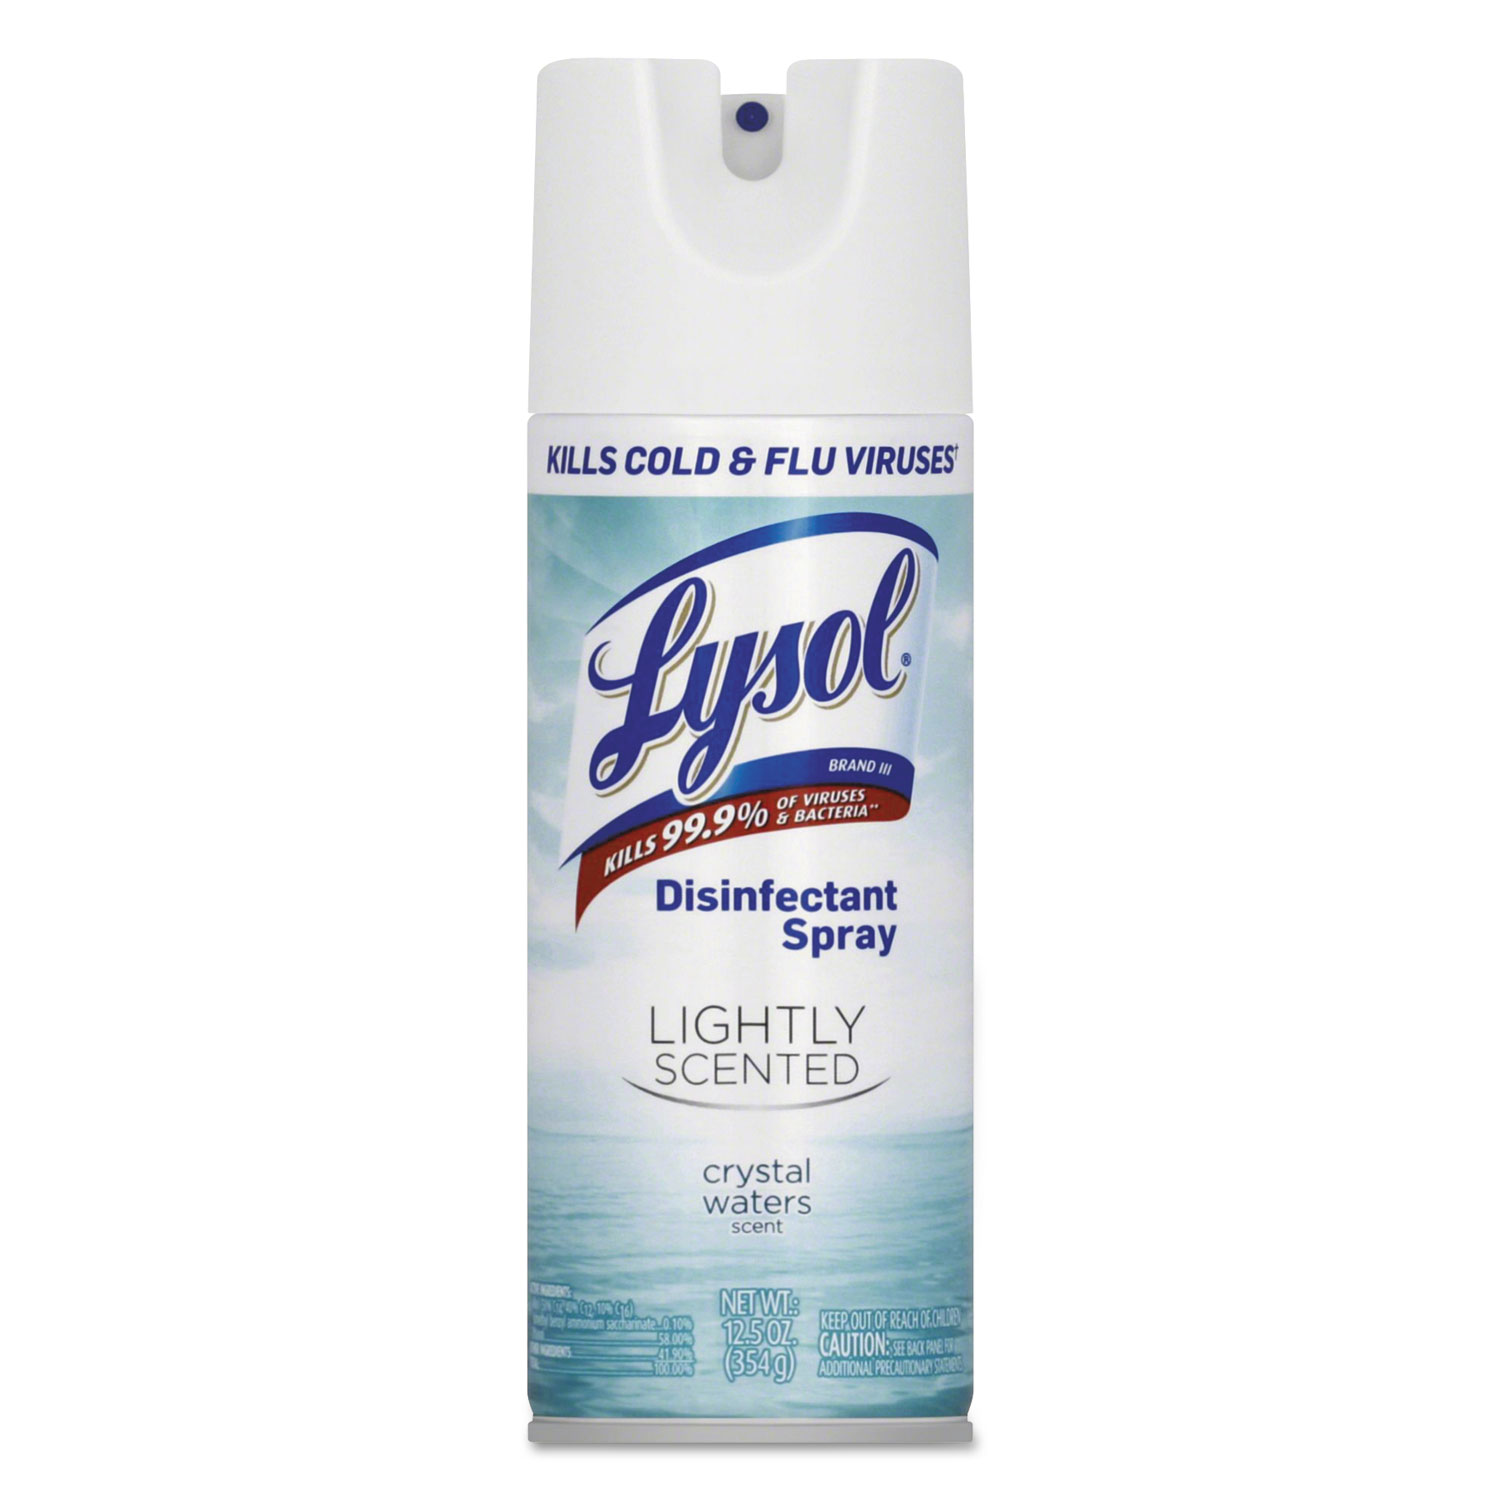 Lightly Scented Disinfectant Spray, Crystal Waters, 12.5 oz